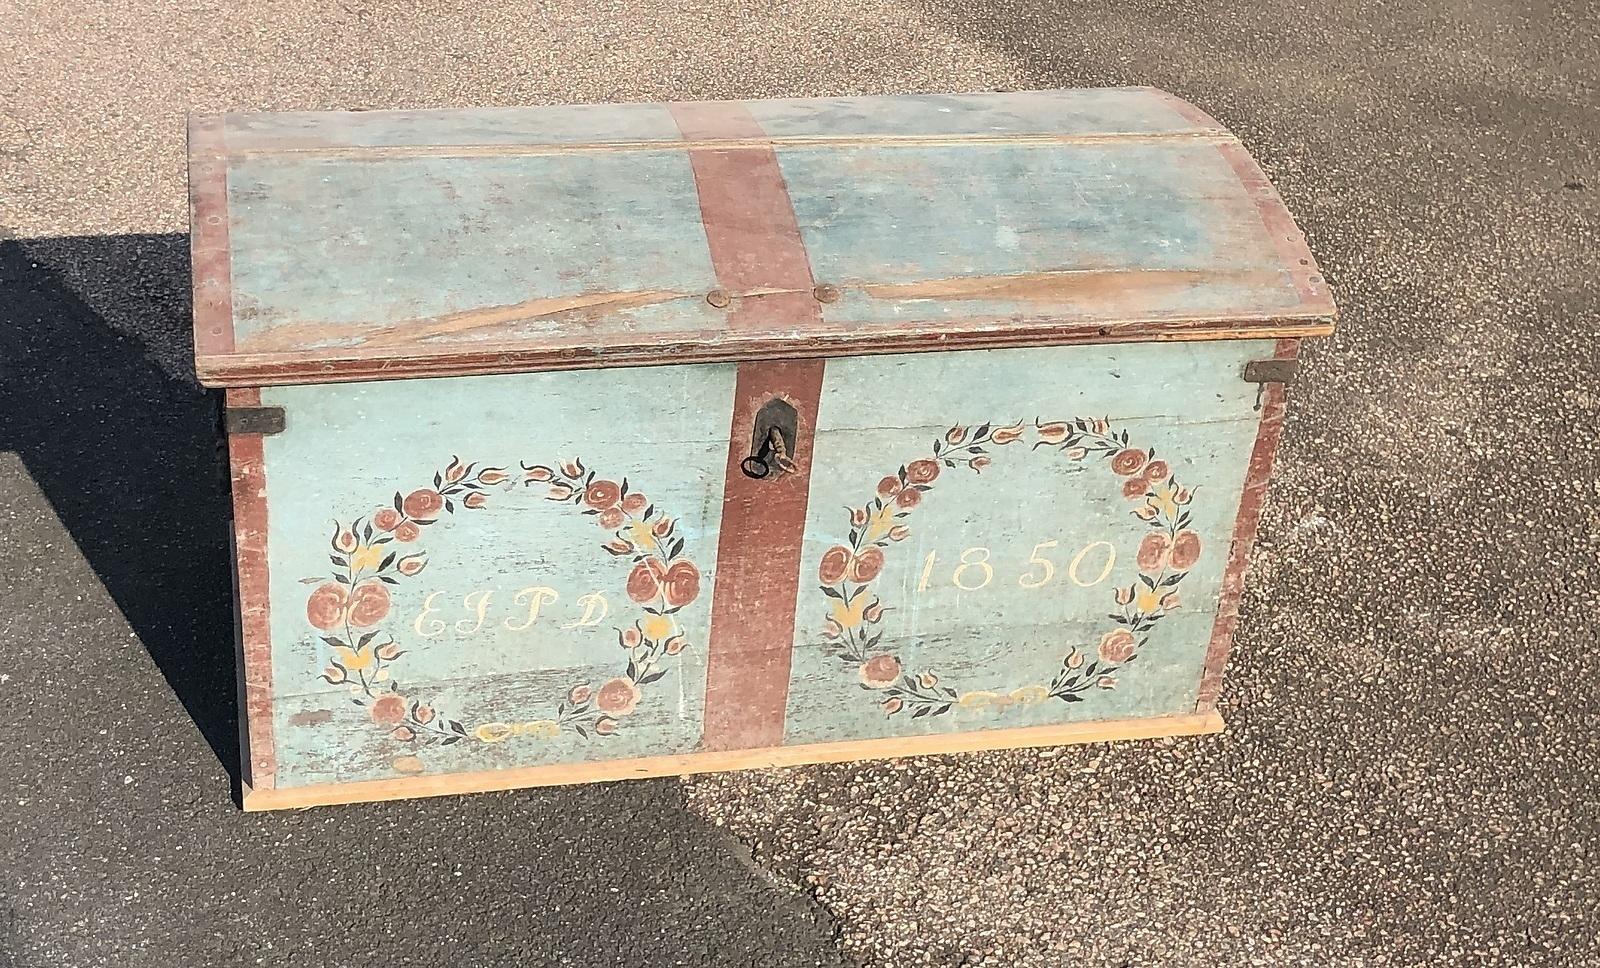 Extremely rare antique Swedish country gustavian blanket box chest in the original hand painted polychromatic finish in the Jamtland style.

Beautiful light blues, darker blues, reds and ochres with hand painted flower wreaths and the original